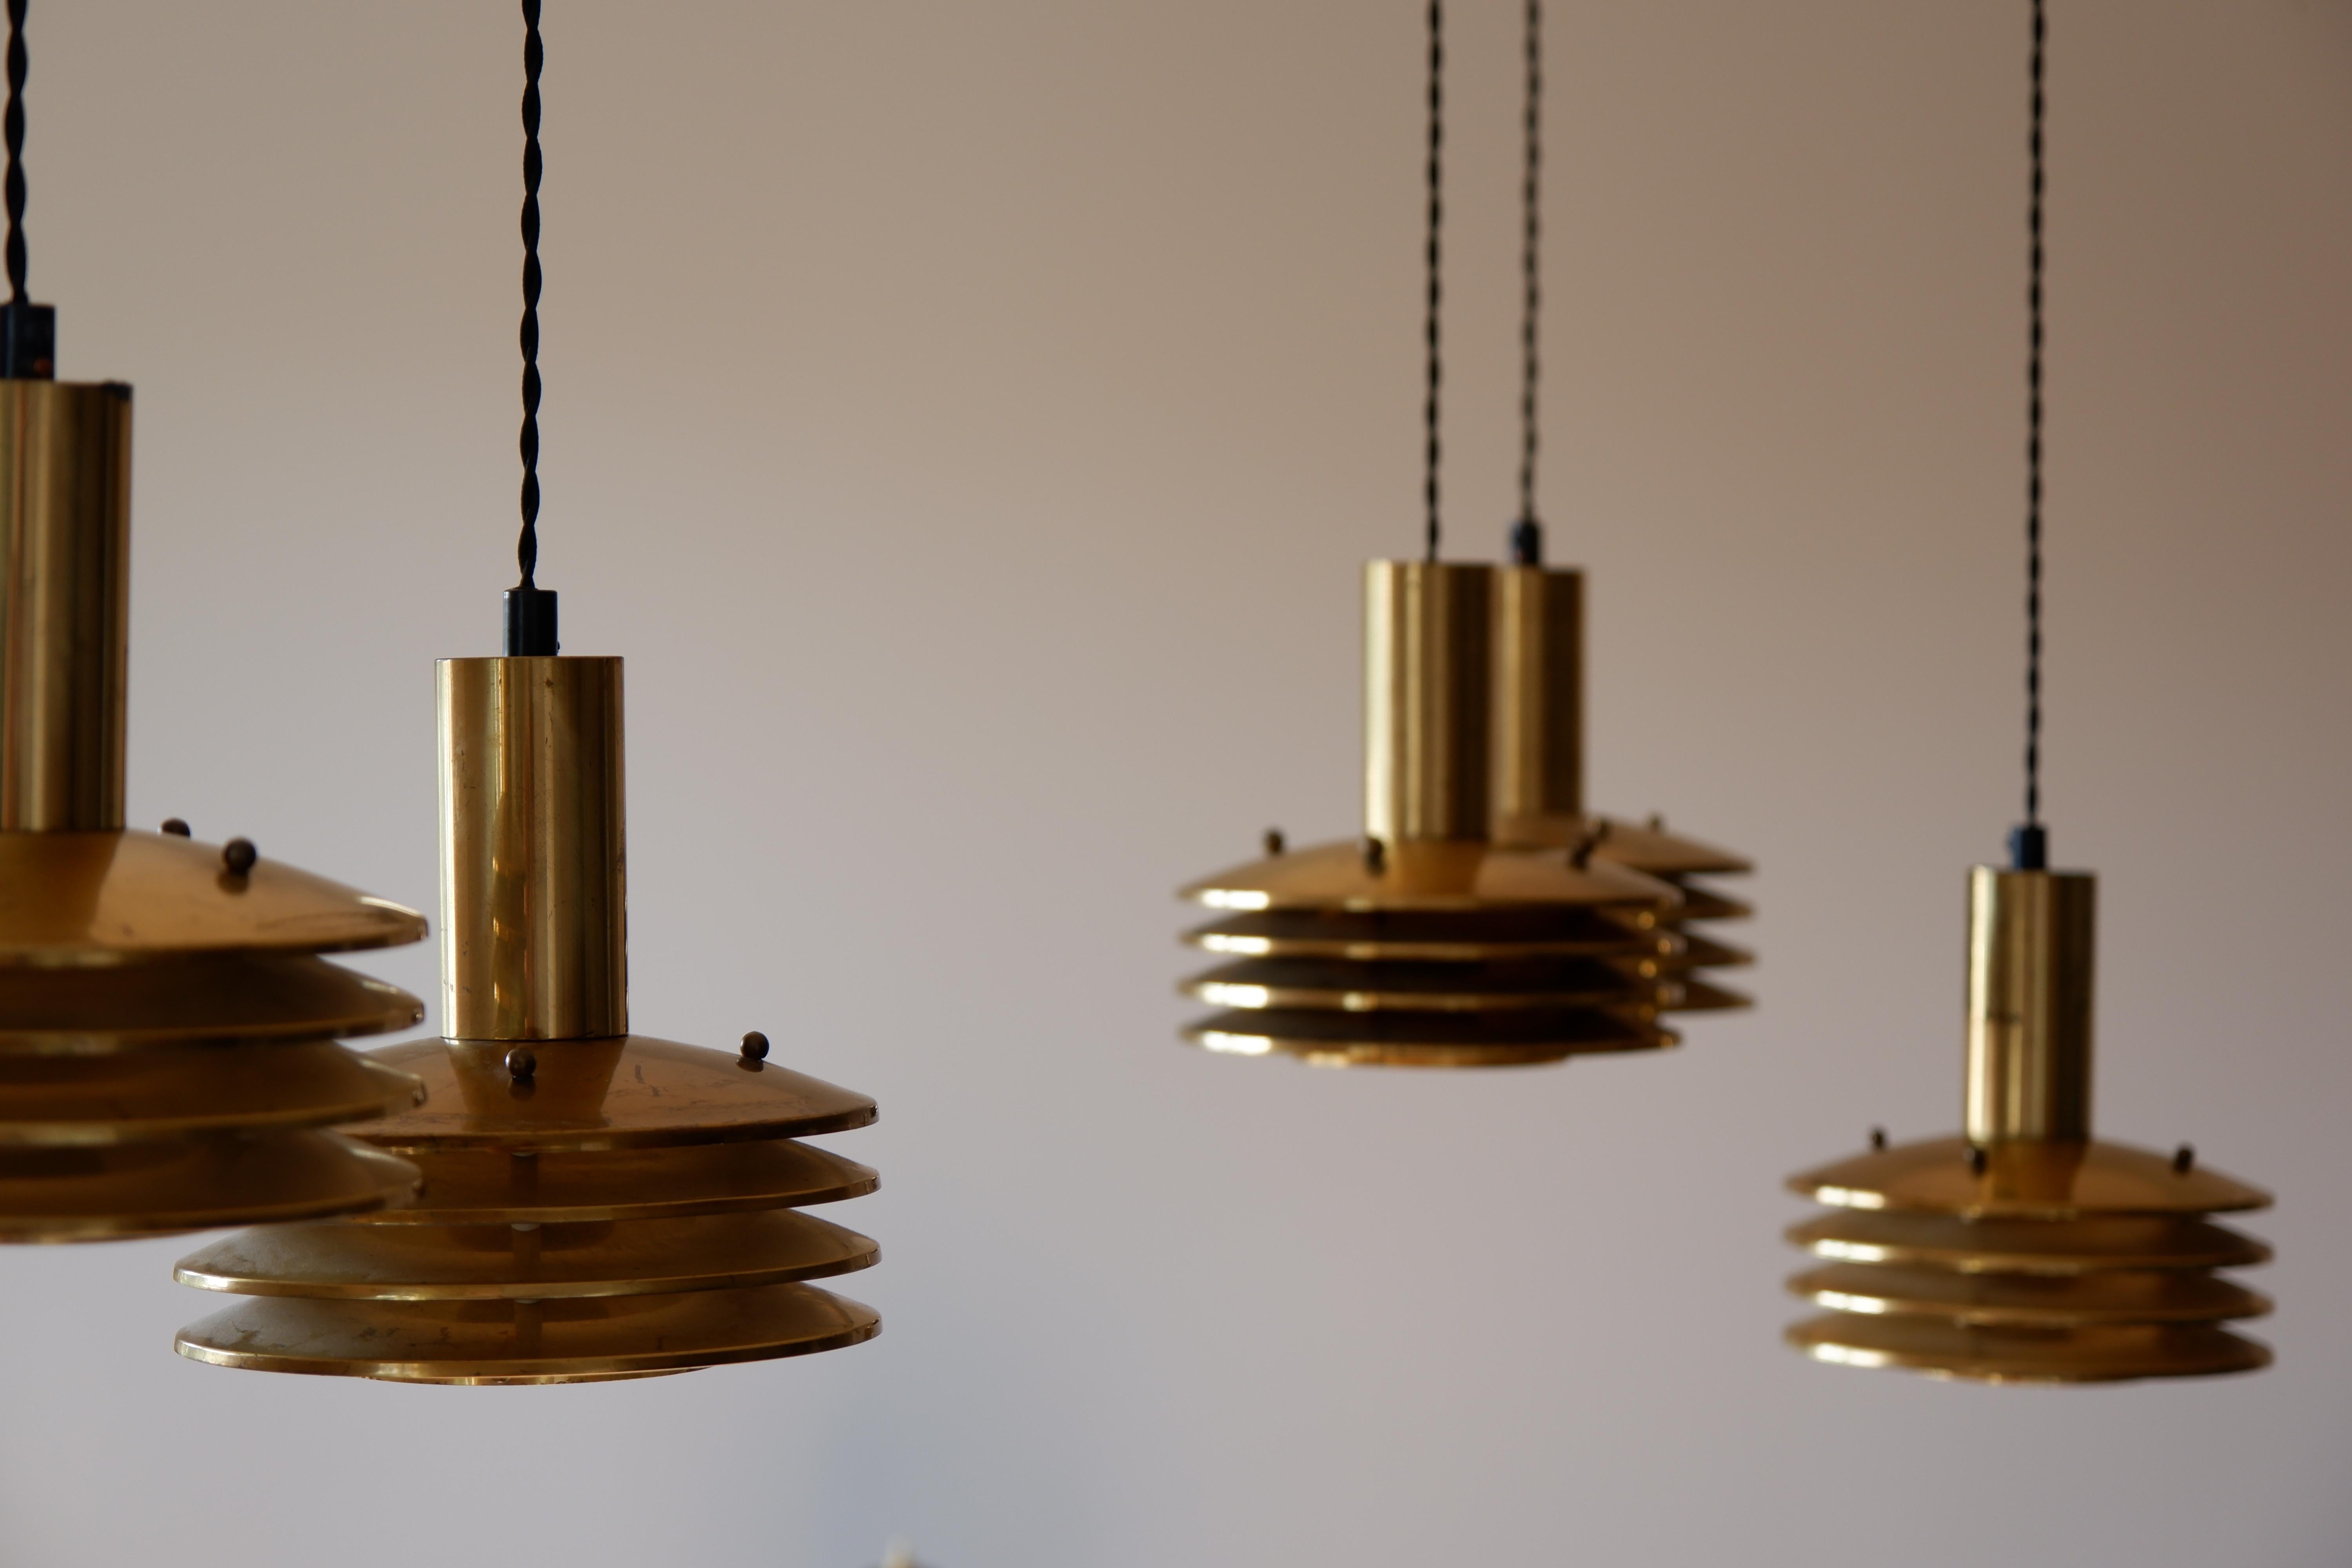 Rare set of 6 Kai Ruokonen lamps, made in solid brass with 4 rings and a glass diffuser. The lamp is composed by two set of 3 lamps hold by a ceiling cup distributors. The overhall condition is good and each lamp has a good patina with trace of use